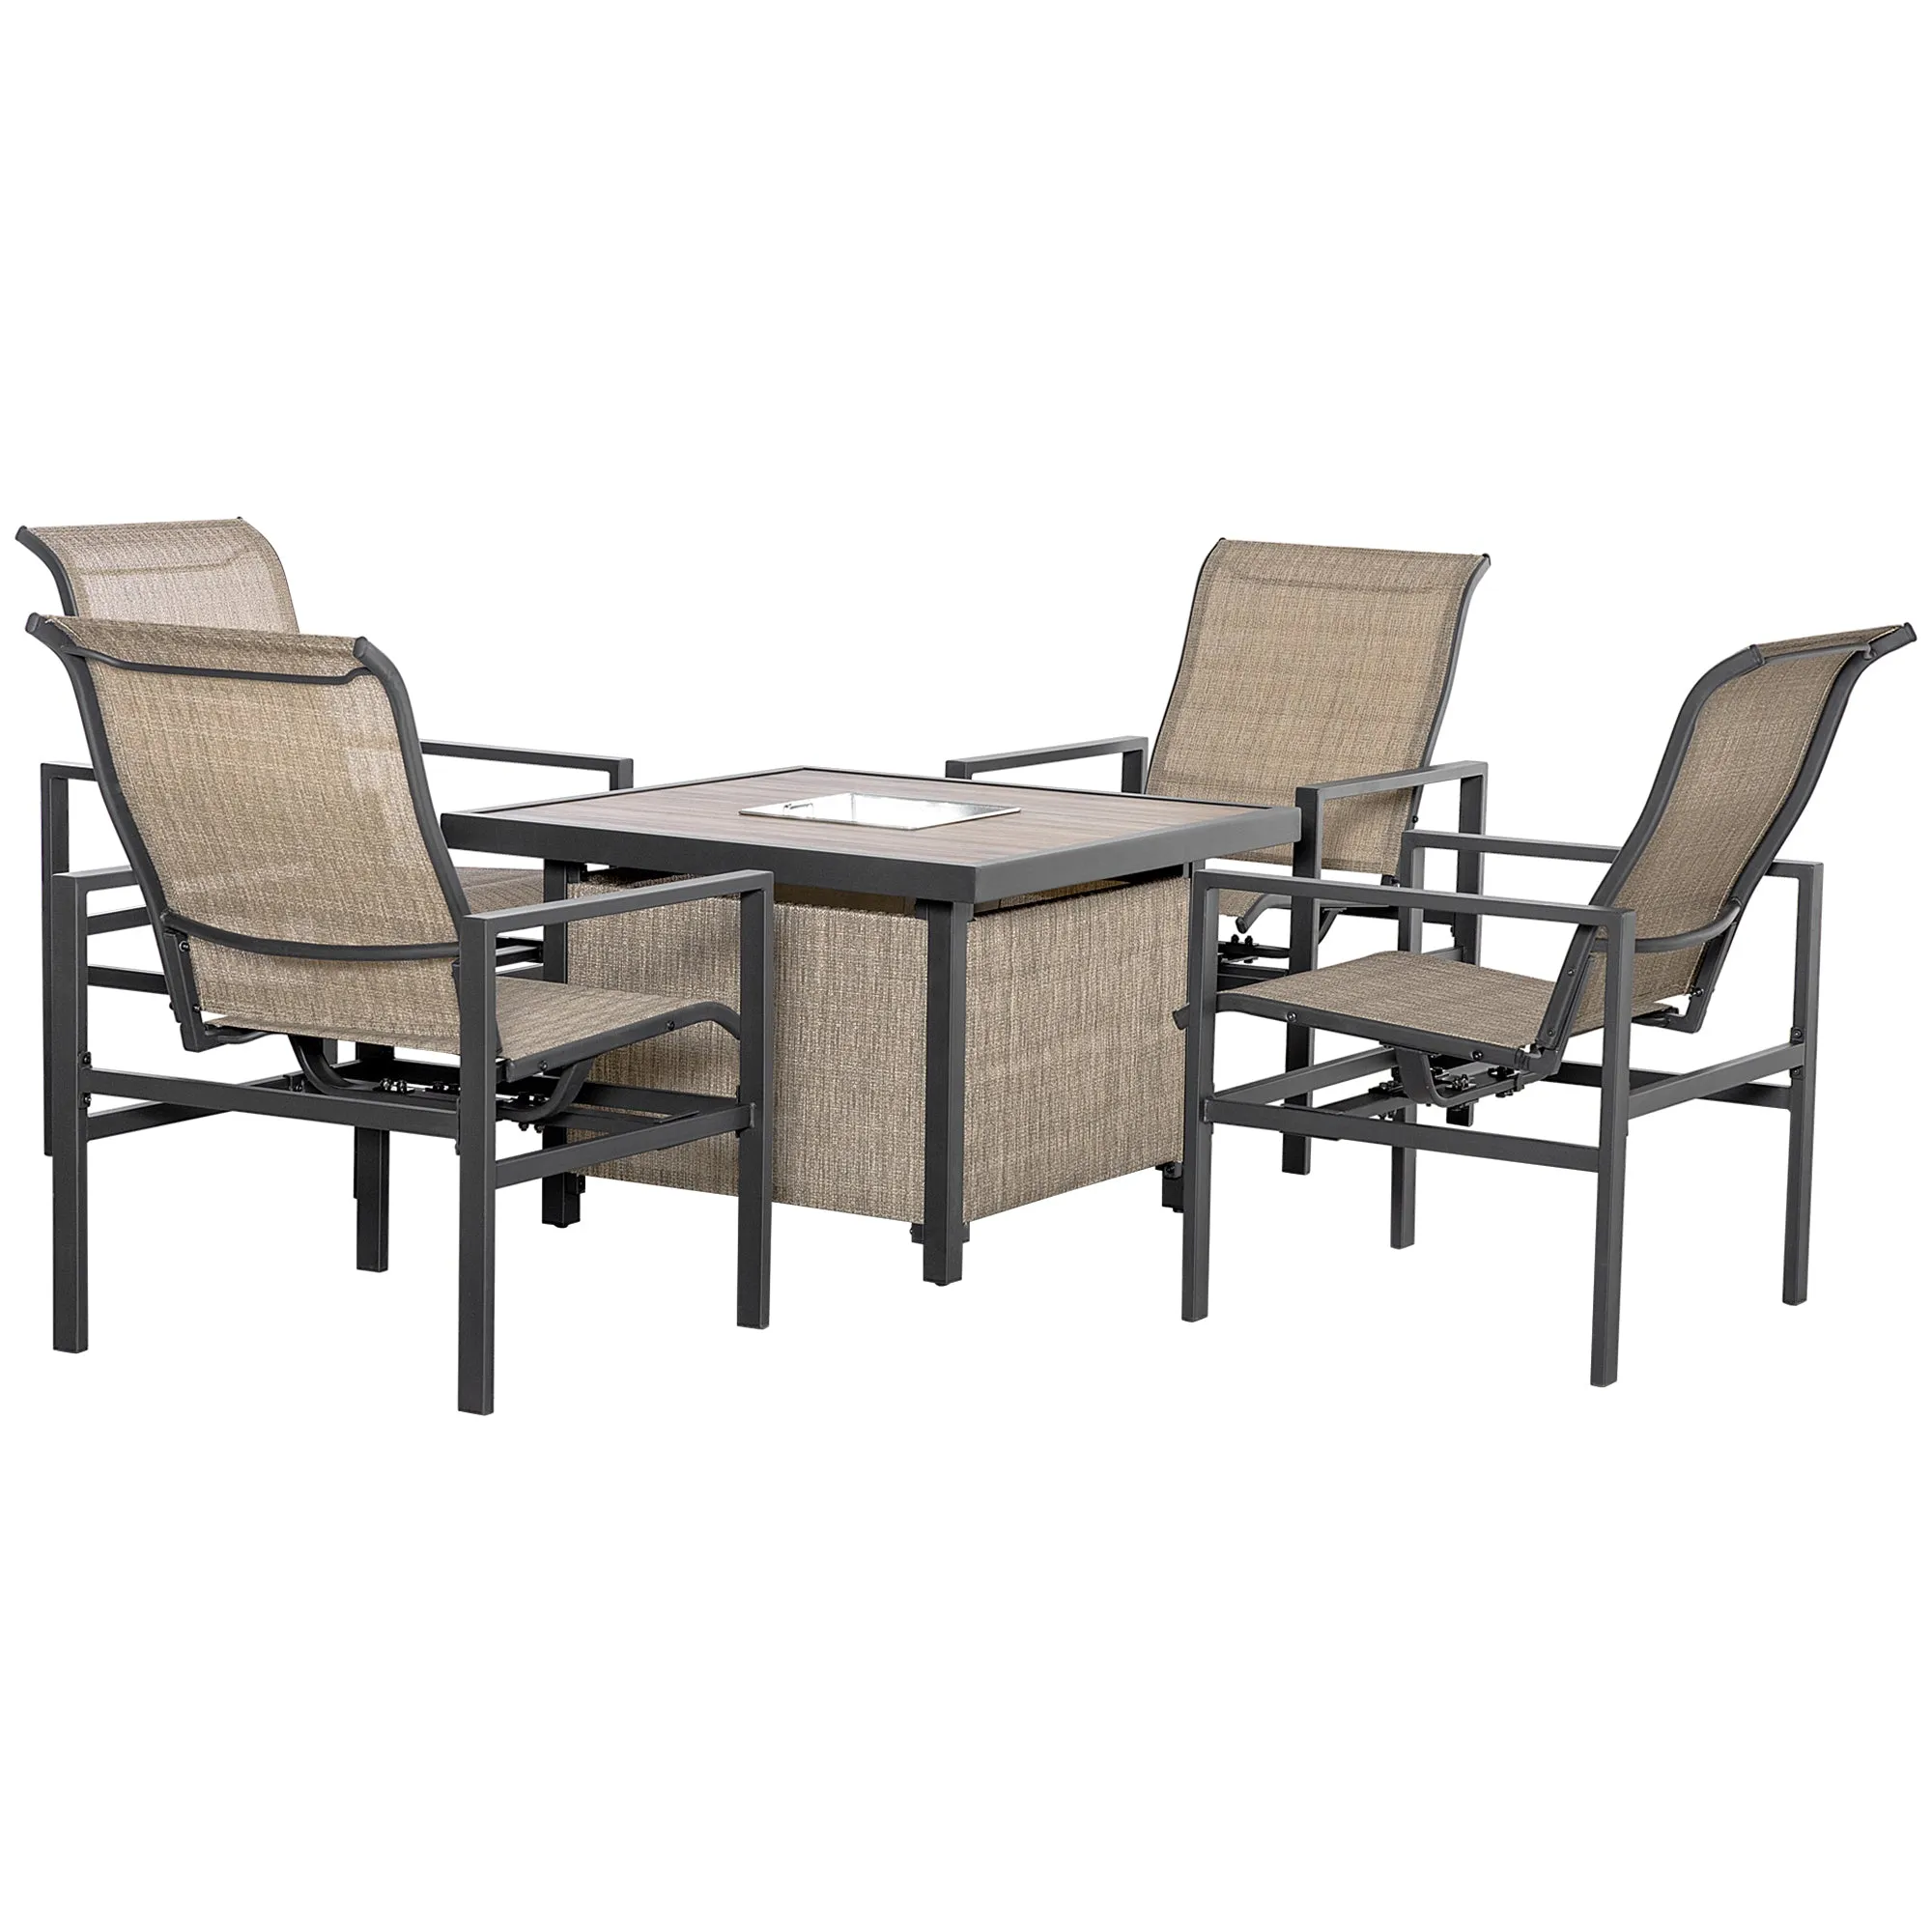 Rattan Patio Dining Set 5-Piece Outdoor Wicker Furniture Set 4 Rocking Chairs Square Table Metal Ice Bucket Beige